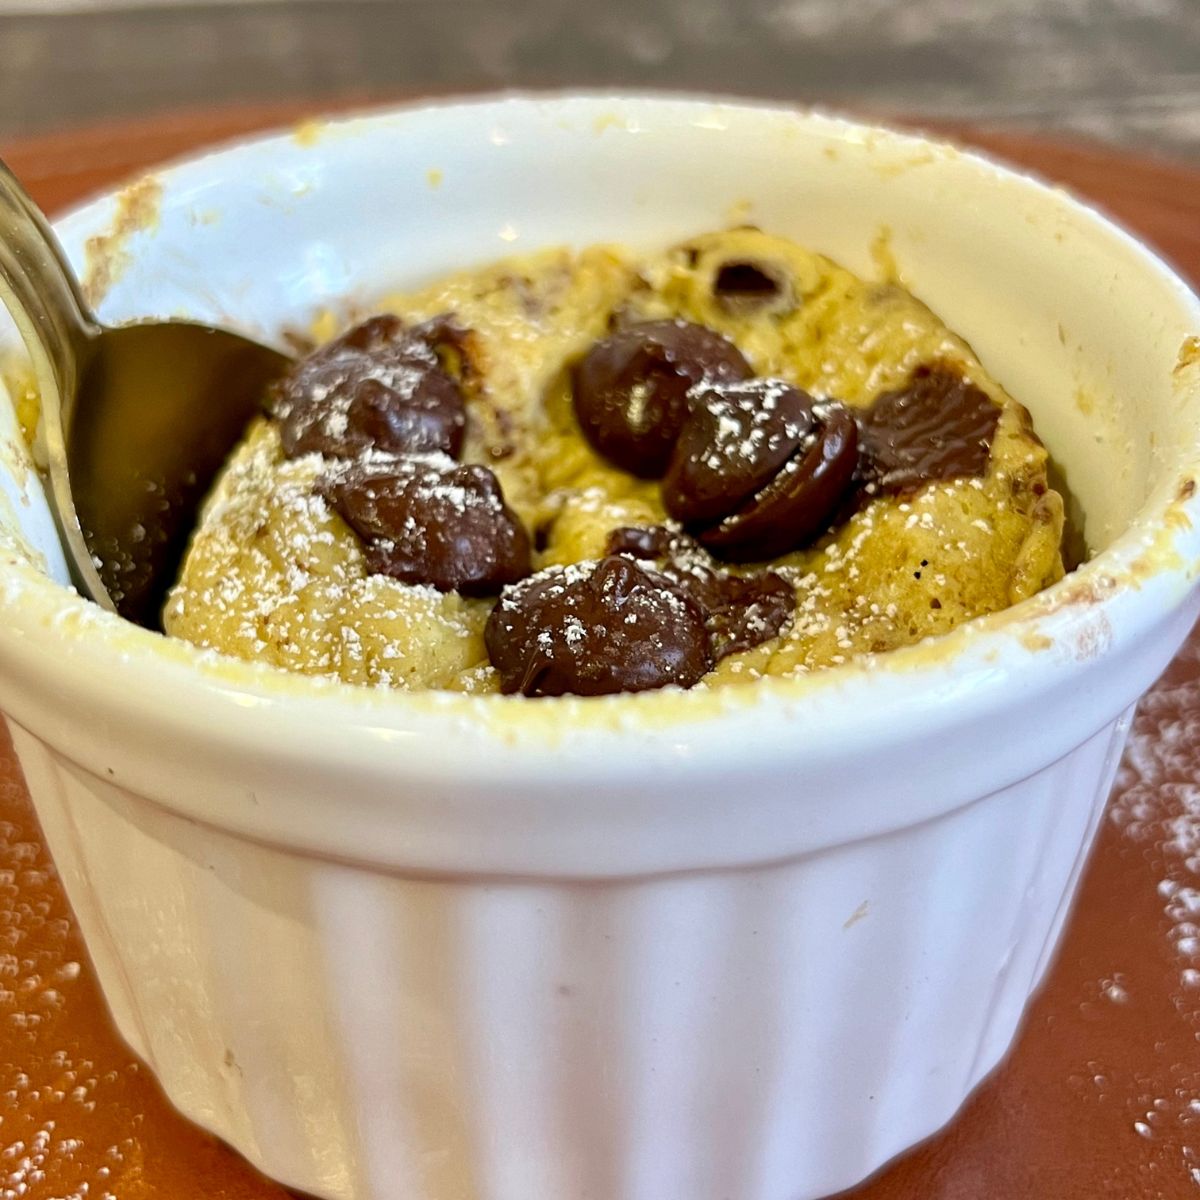 A protein powder mug cake with chocolate chips on top in a white ramekin